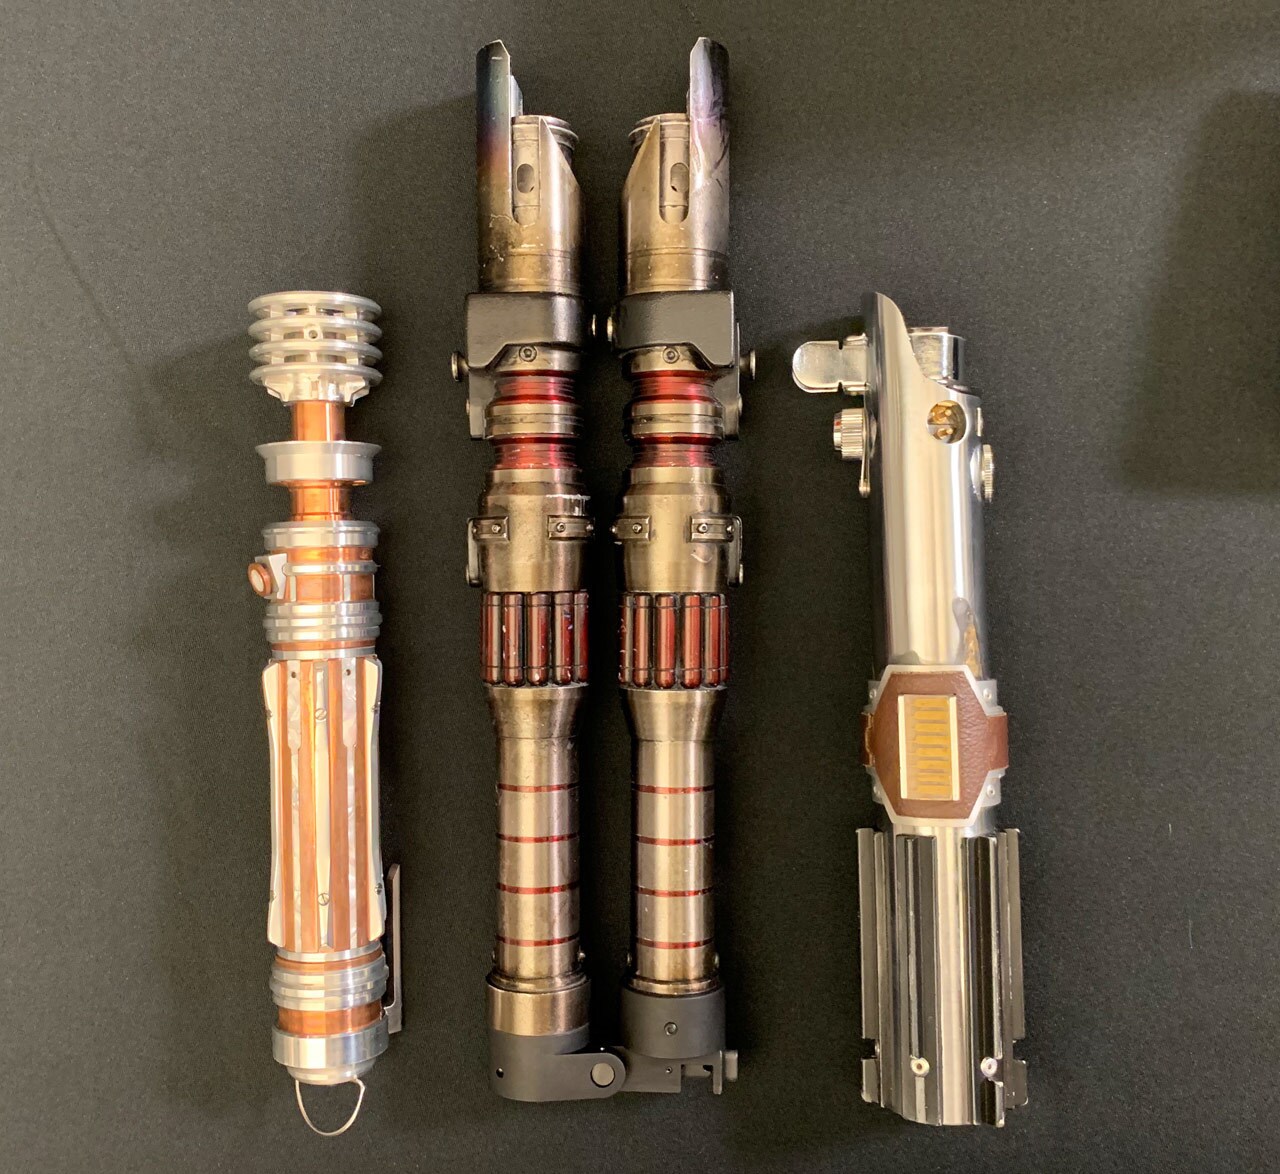 Leia's Legacy, Dark Rey’s double blade, and the Skywalker lightsaber